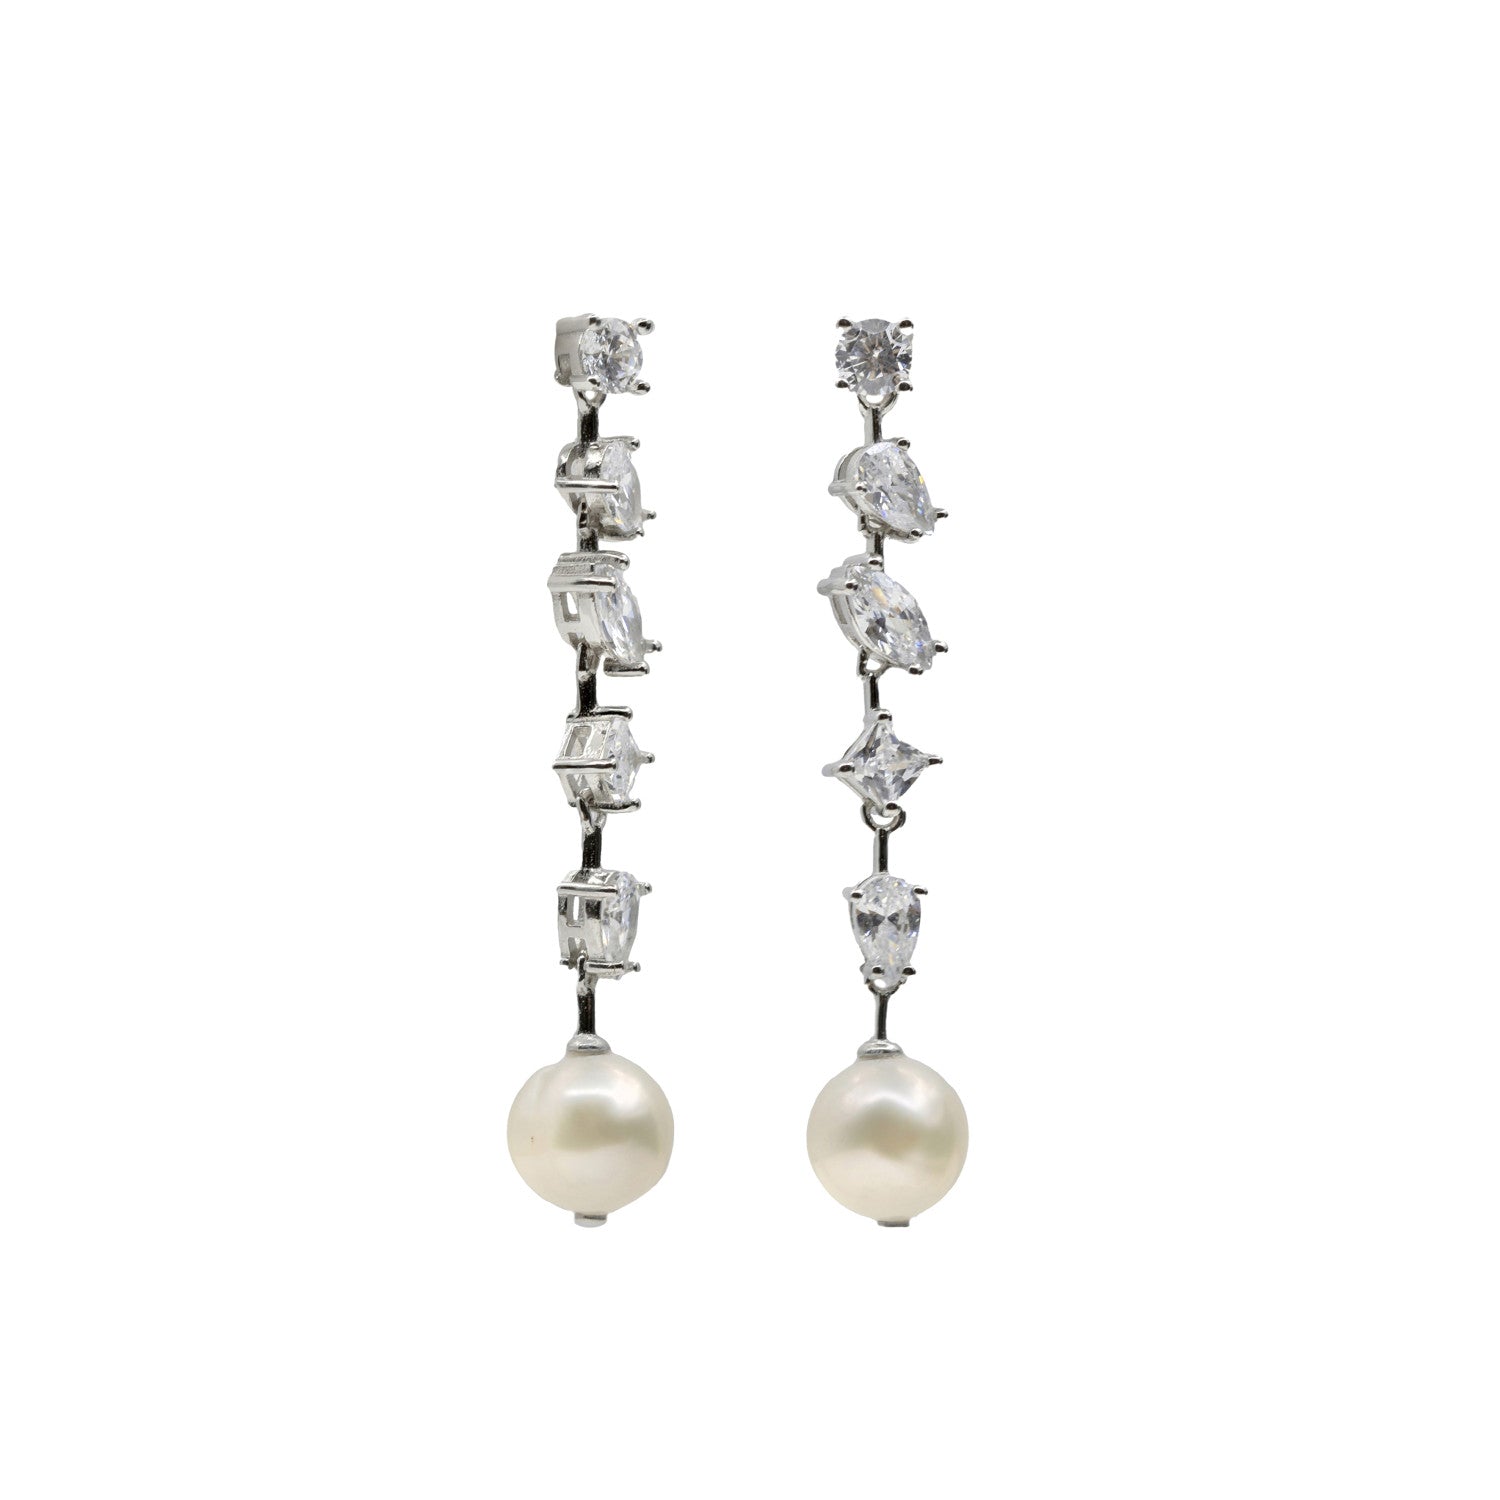 Long bridal earrings with irregular zirconia and pearls